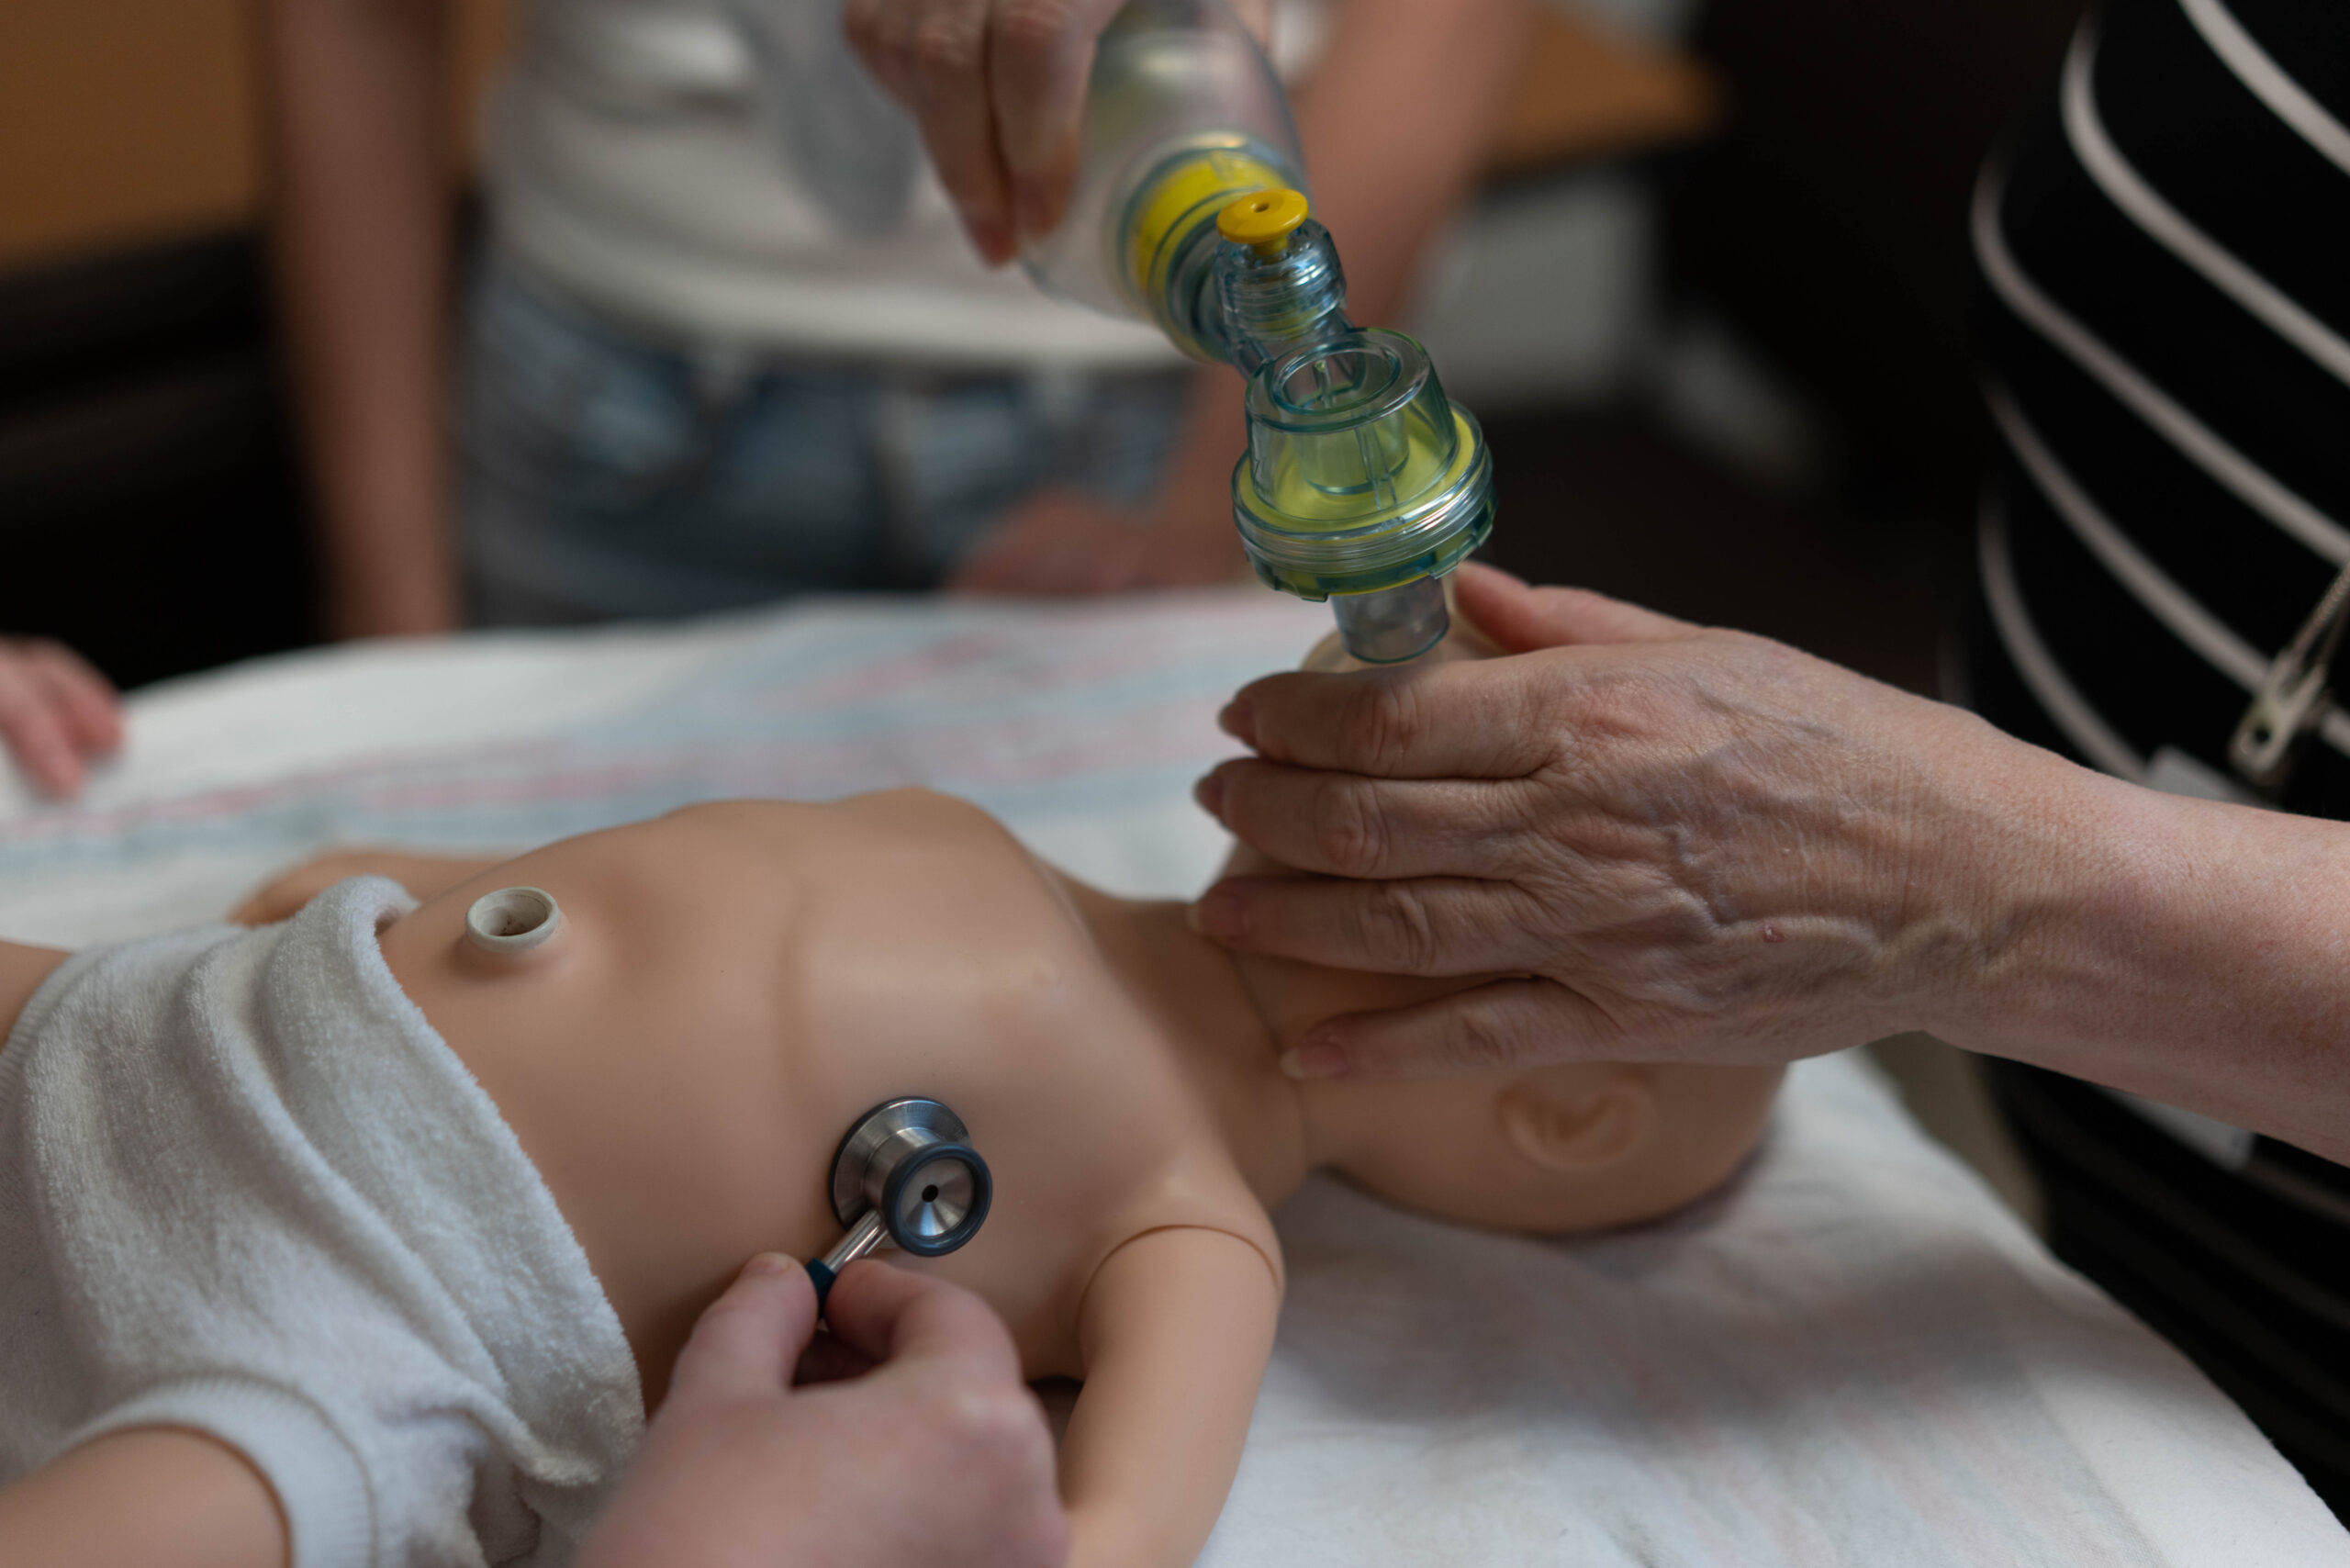 An close-up of an infant manakin being ventilated with a bag valve mask by an instructor while a student auscultates the manakins chest with a stethoscope.